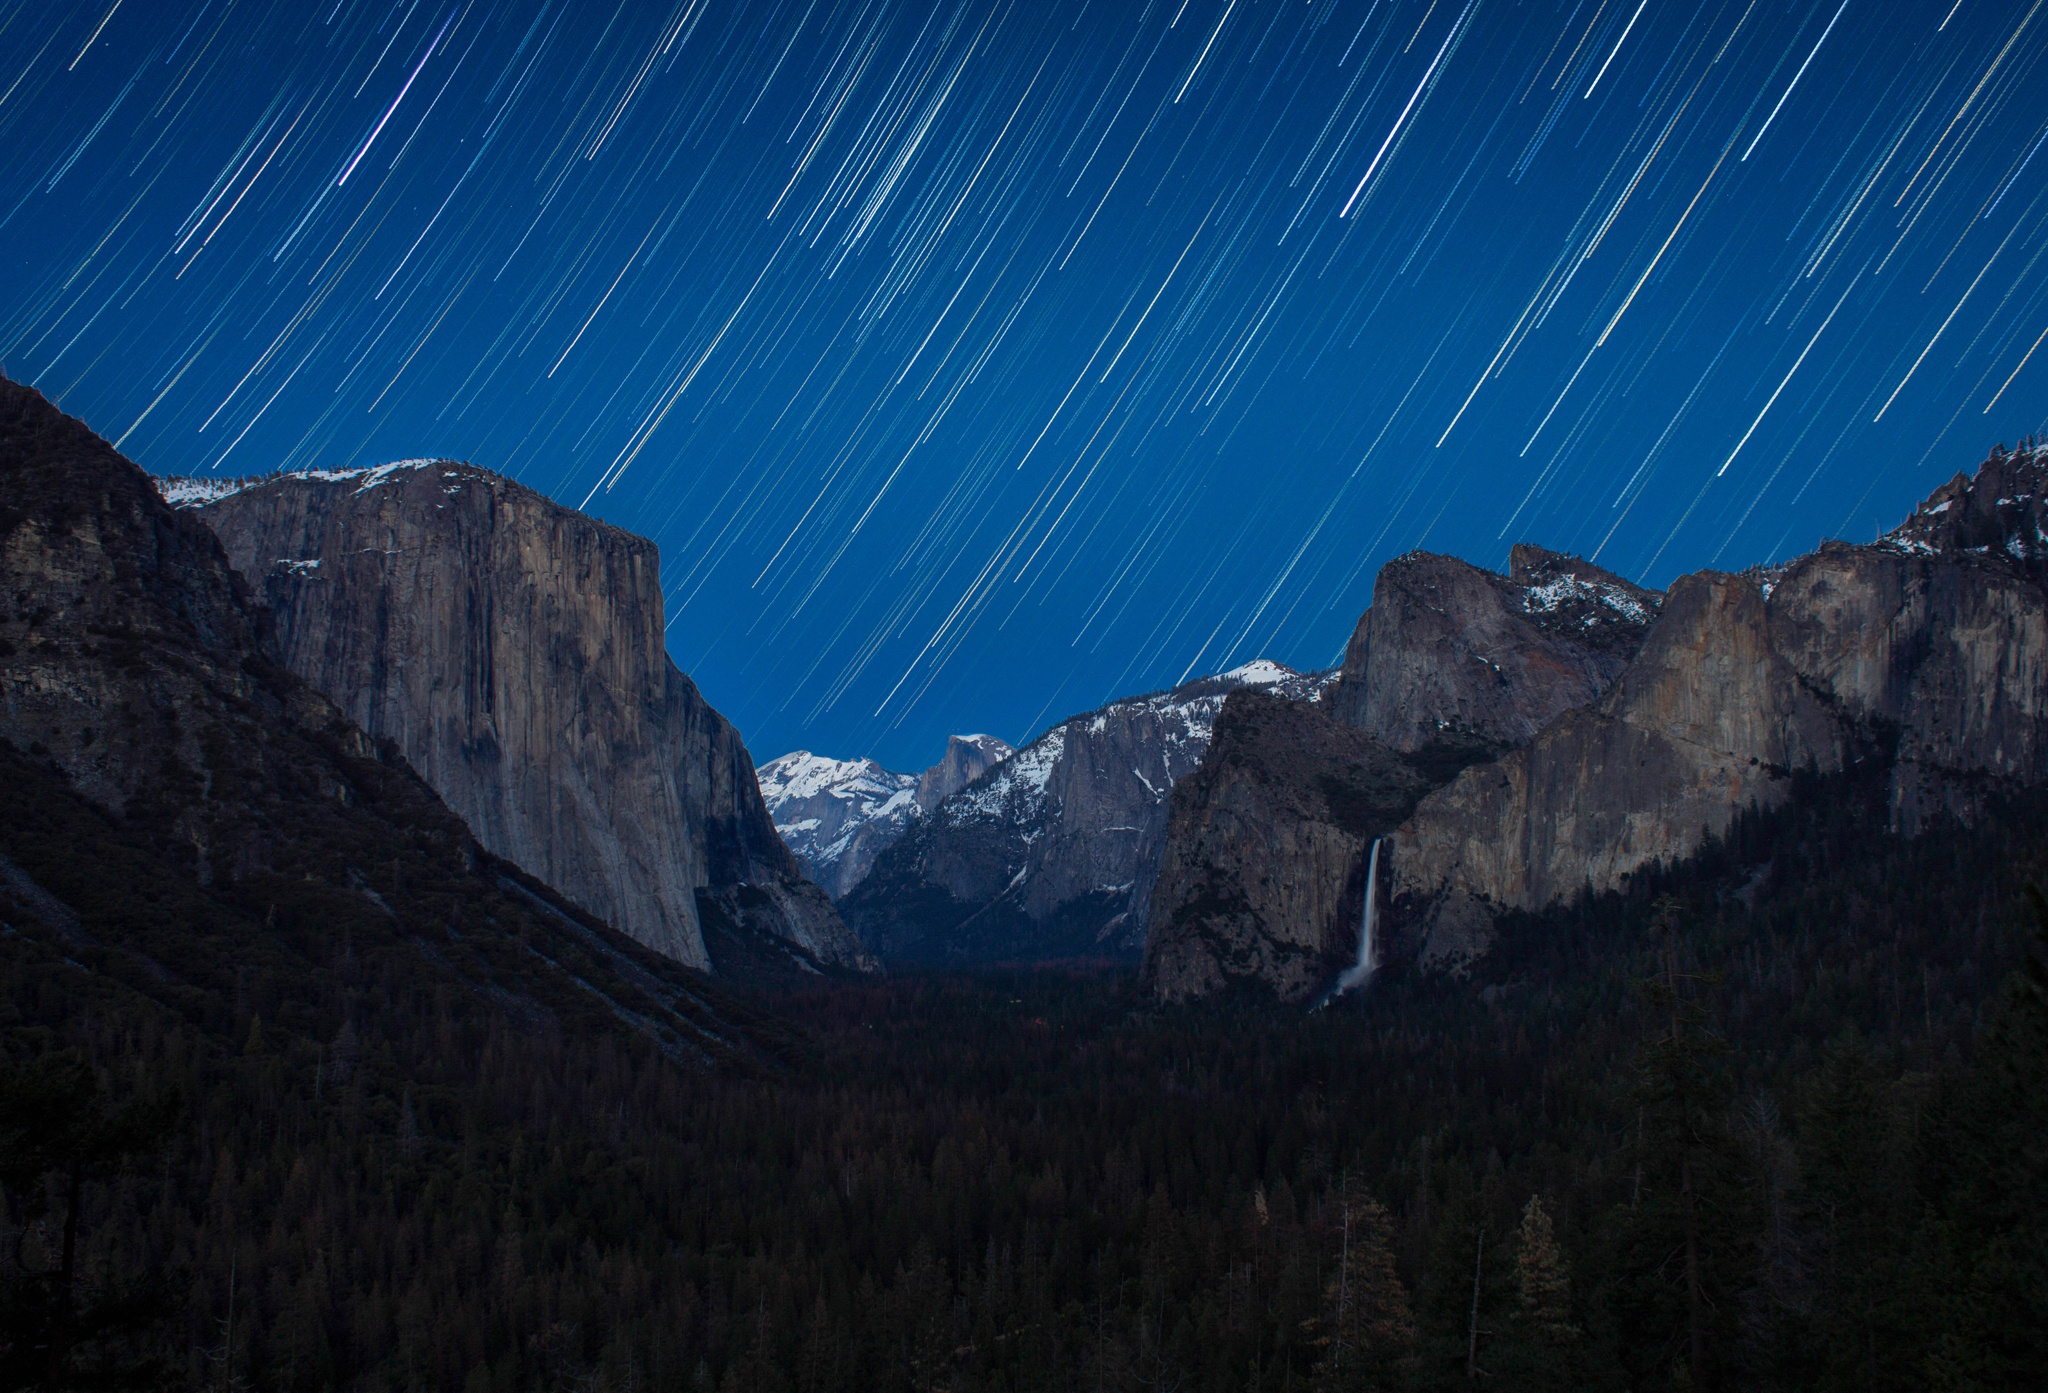 earth, yosemite national park, cliff, forest, mountain, night, sky, star trail, stars, national park